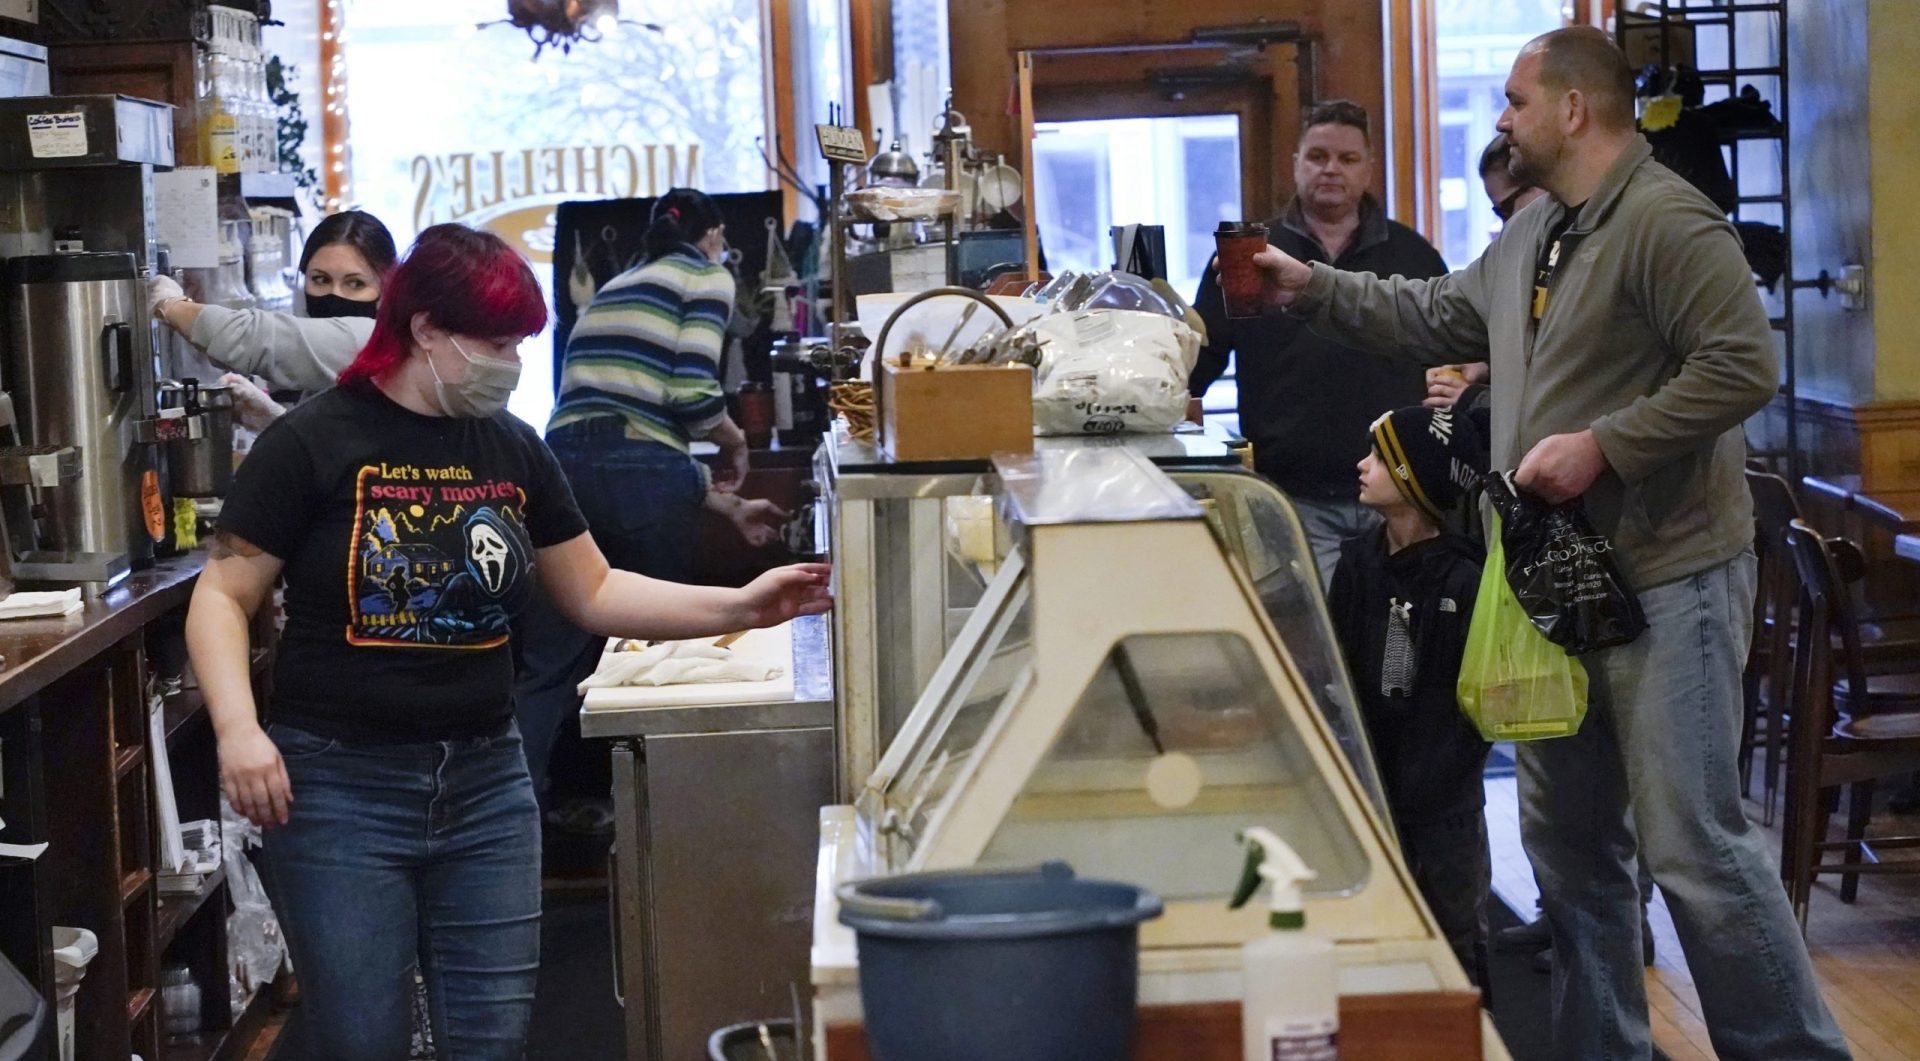 People get their orders at the counter of Michelle's Cafe along Main Street, in Clarion, Pa., Saturday, Feb. 12, 2022. (